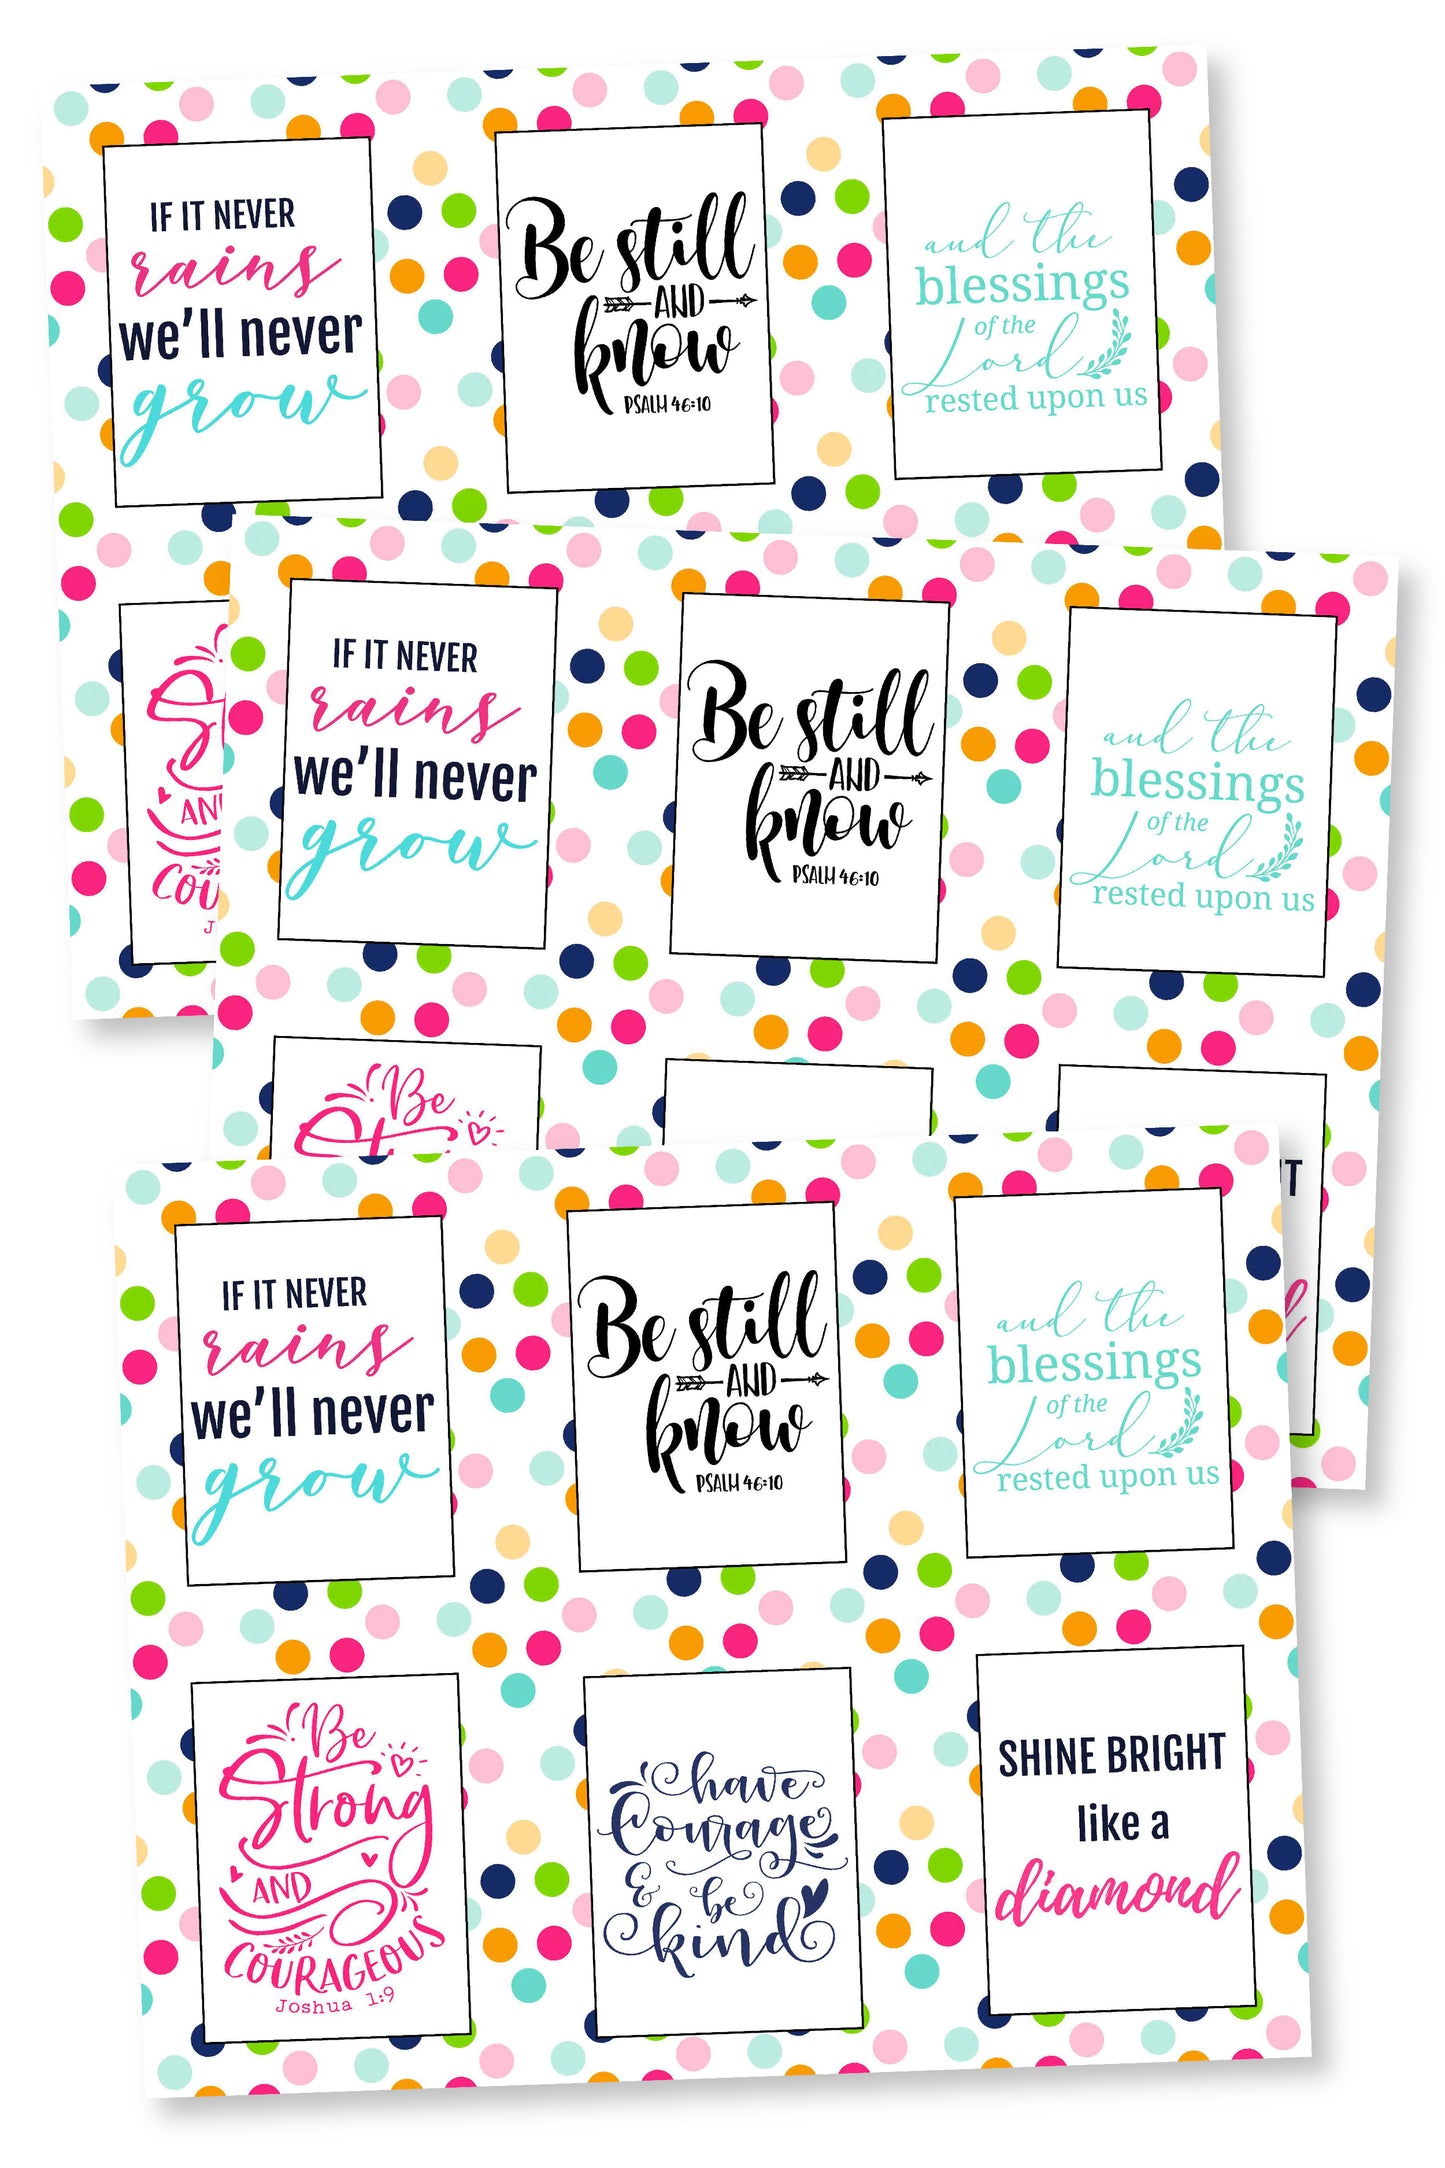 Random Acts of Kindness Printable Cards